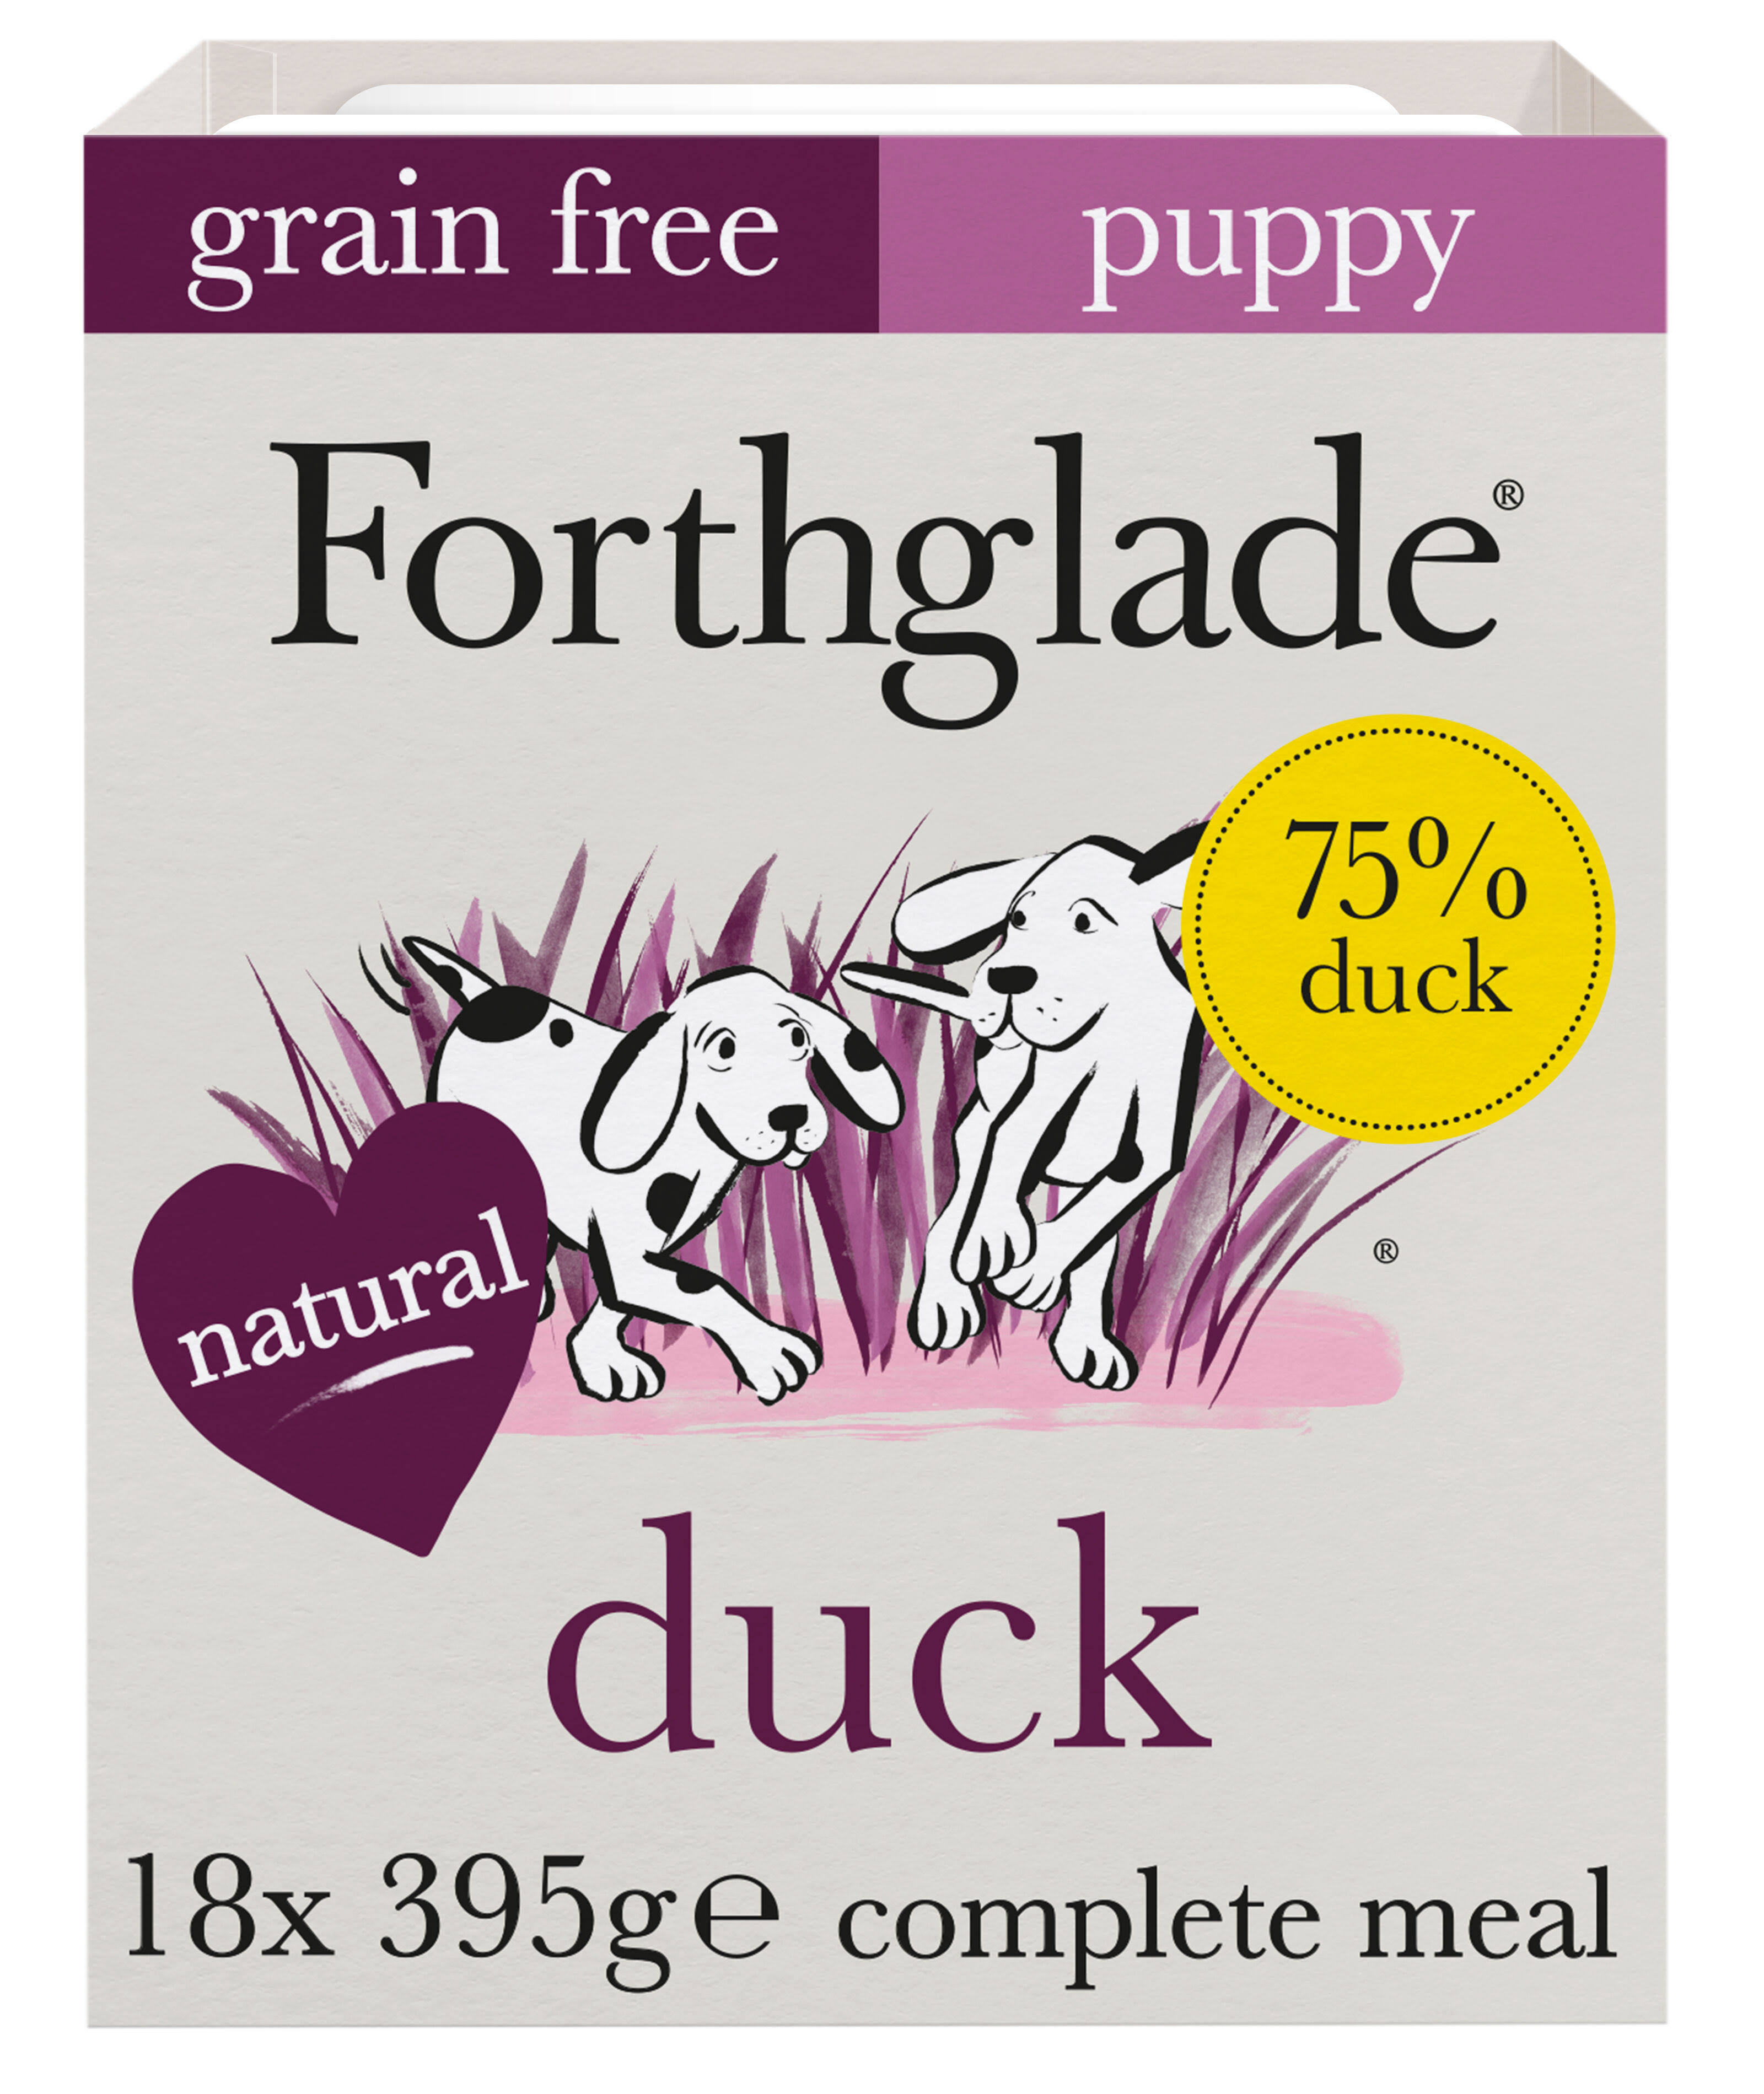 Forthglade Puppy Grain Free Dog Dinner - Duck, Sweet Potato and Vegetables, 395g, 7 Pack